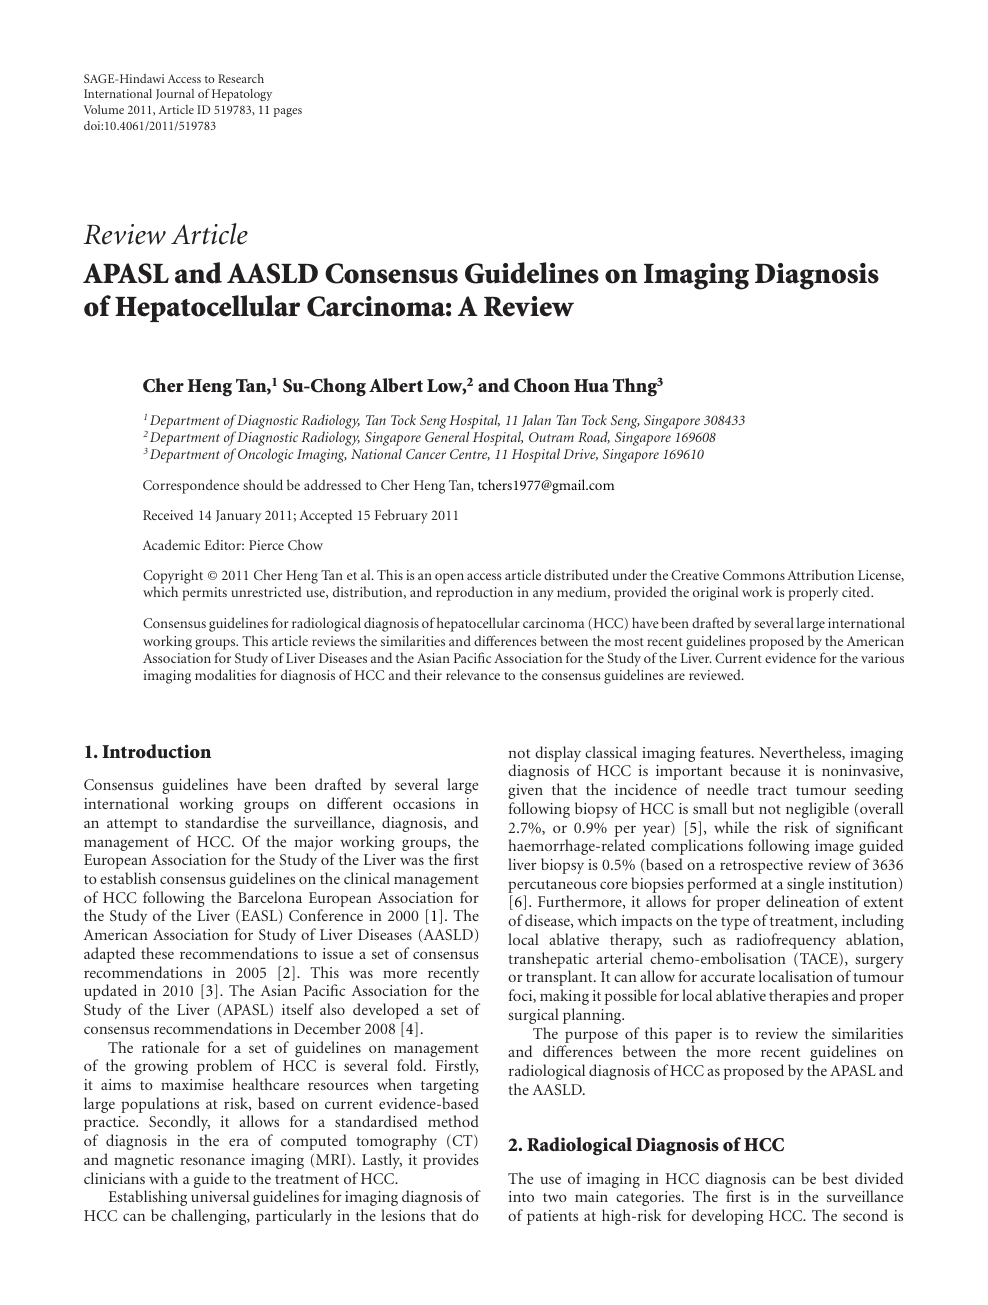 Apasl And sld Consensus Guidelines On Imaging Diagnosis Of Hepatocellular Carcinoma A Review Topic Of Research Paper In Clinical Medicine Download Scholarly Article Pdf And Read For Free On Cyberleninka Open